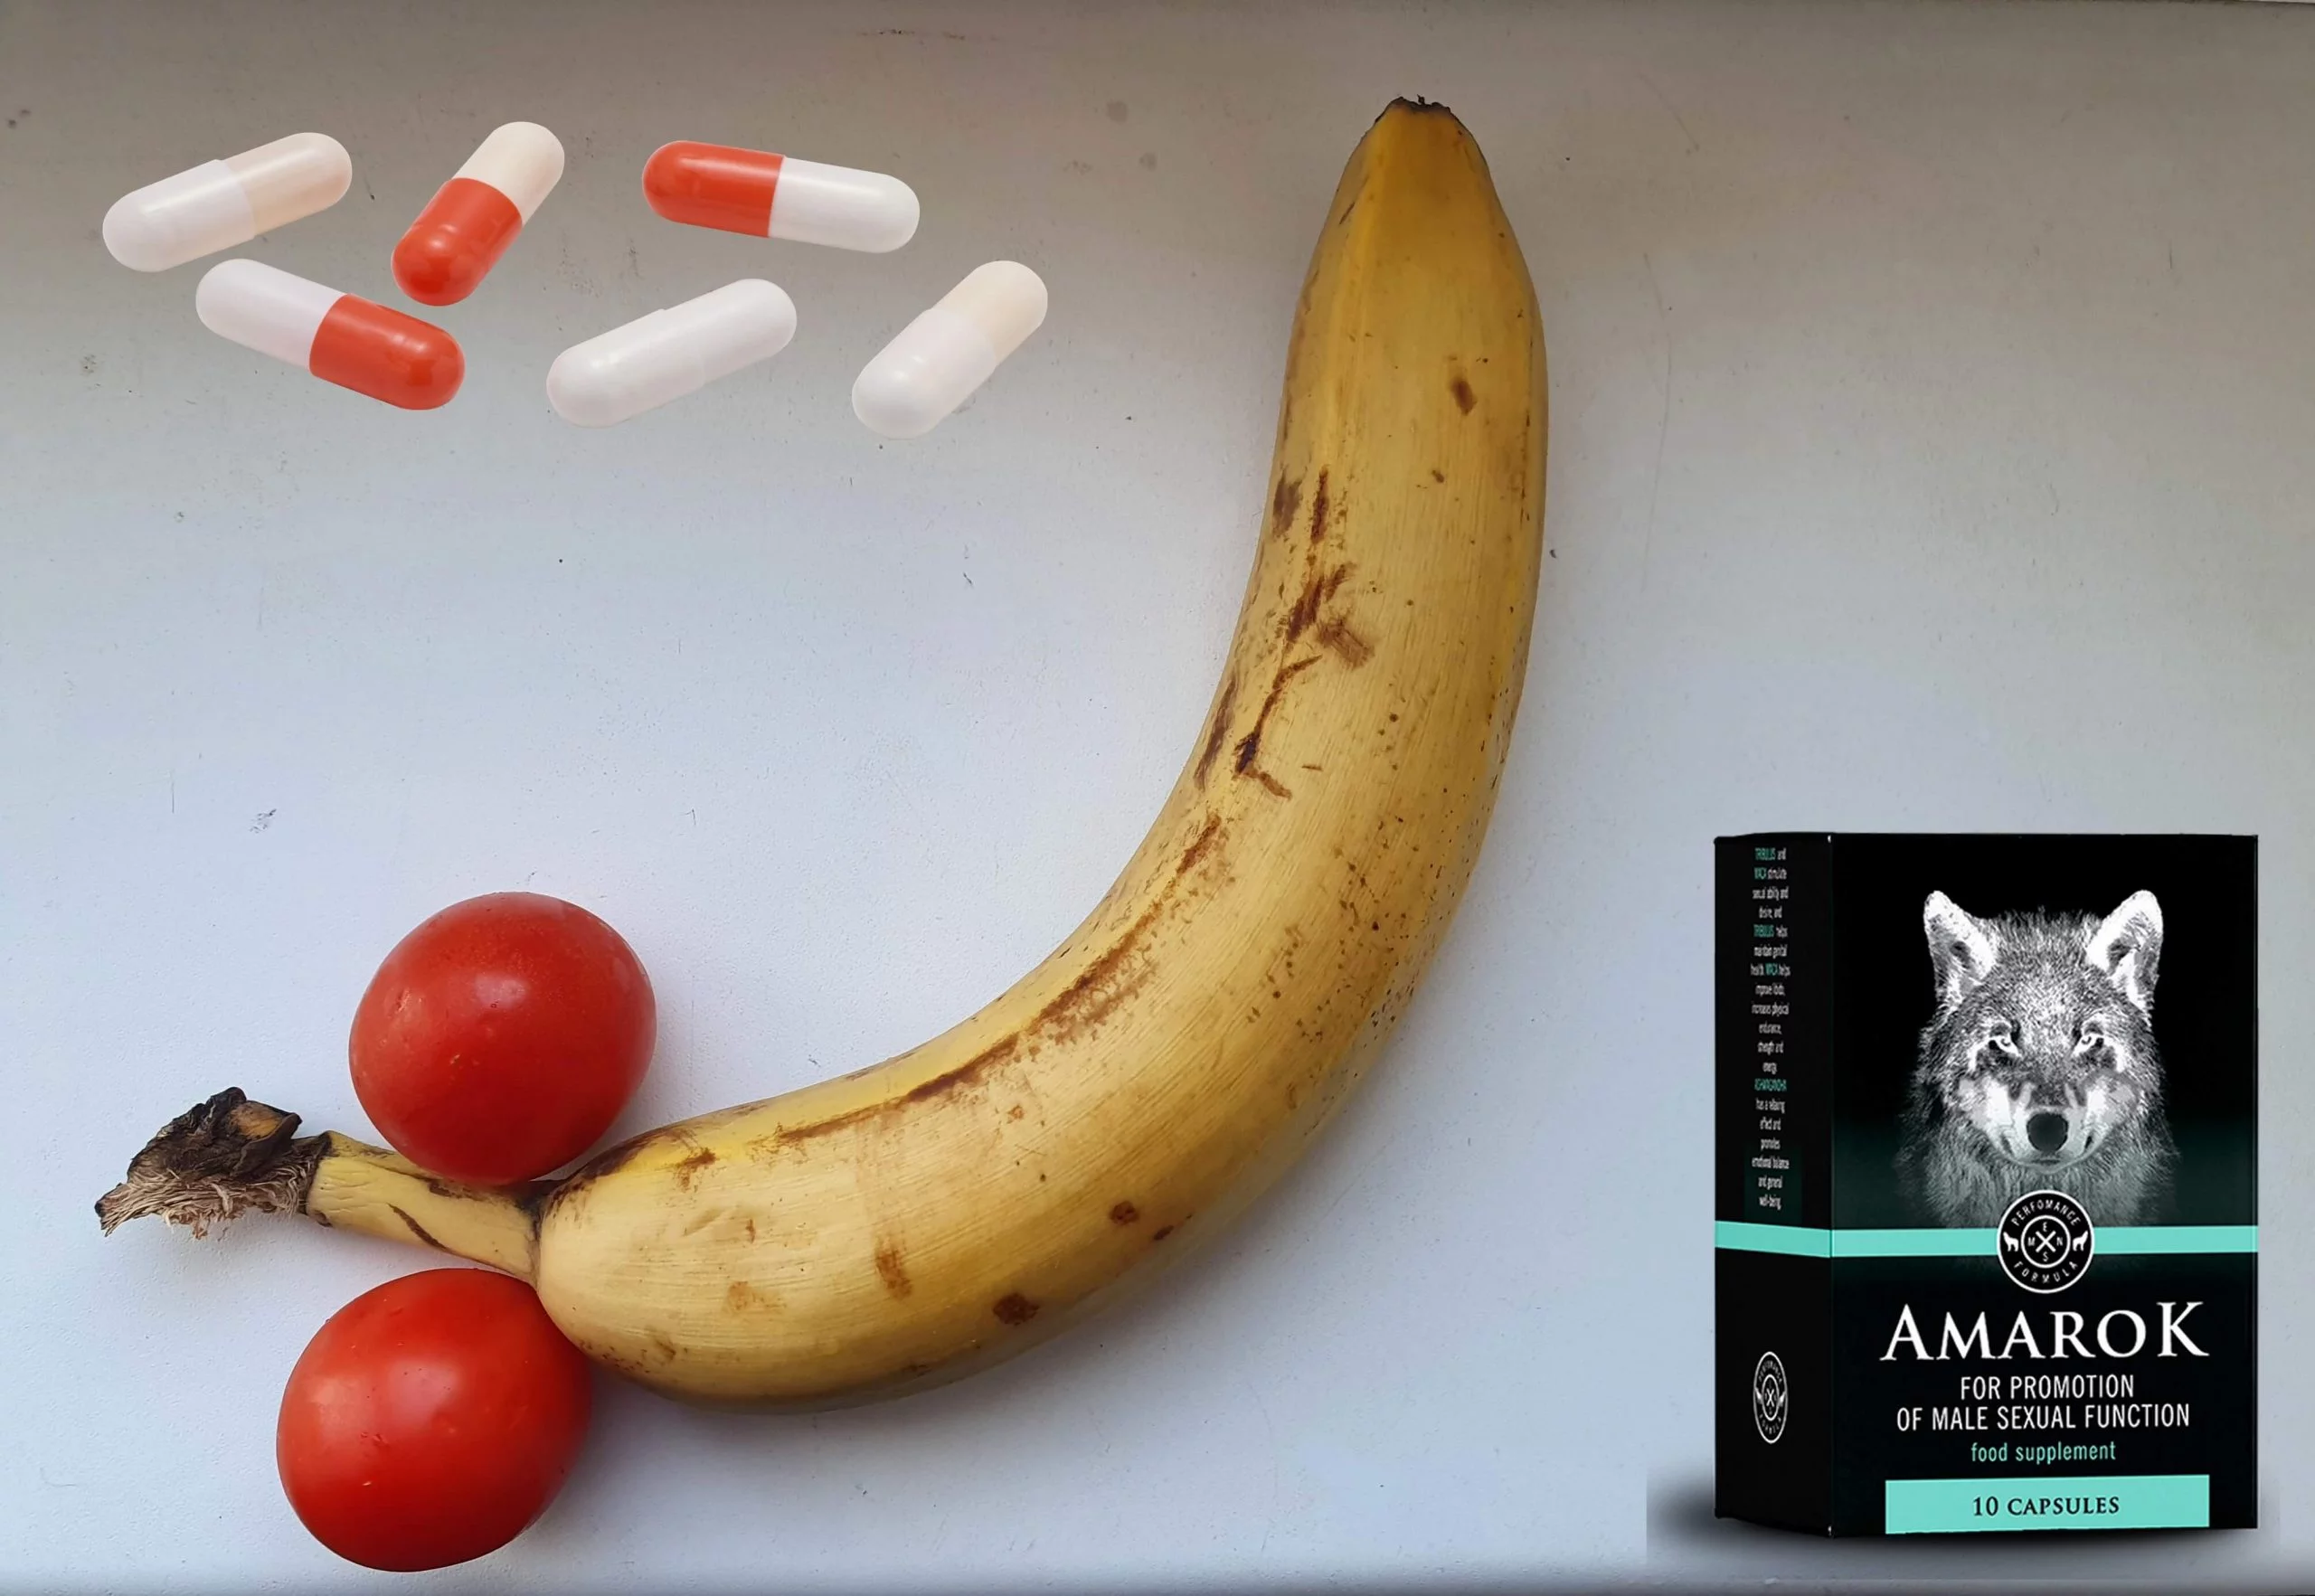 Strong erection with Amarok capsules for potency